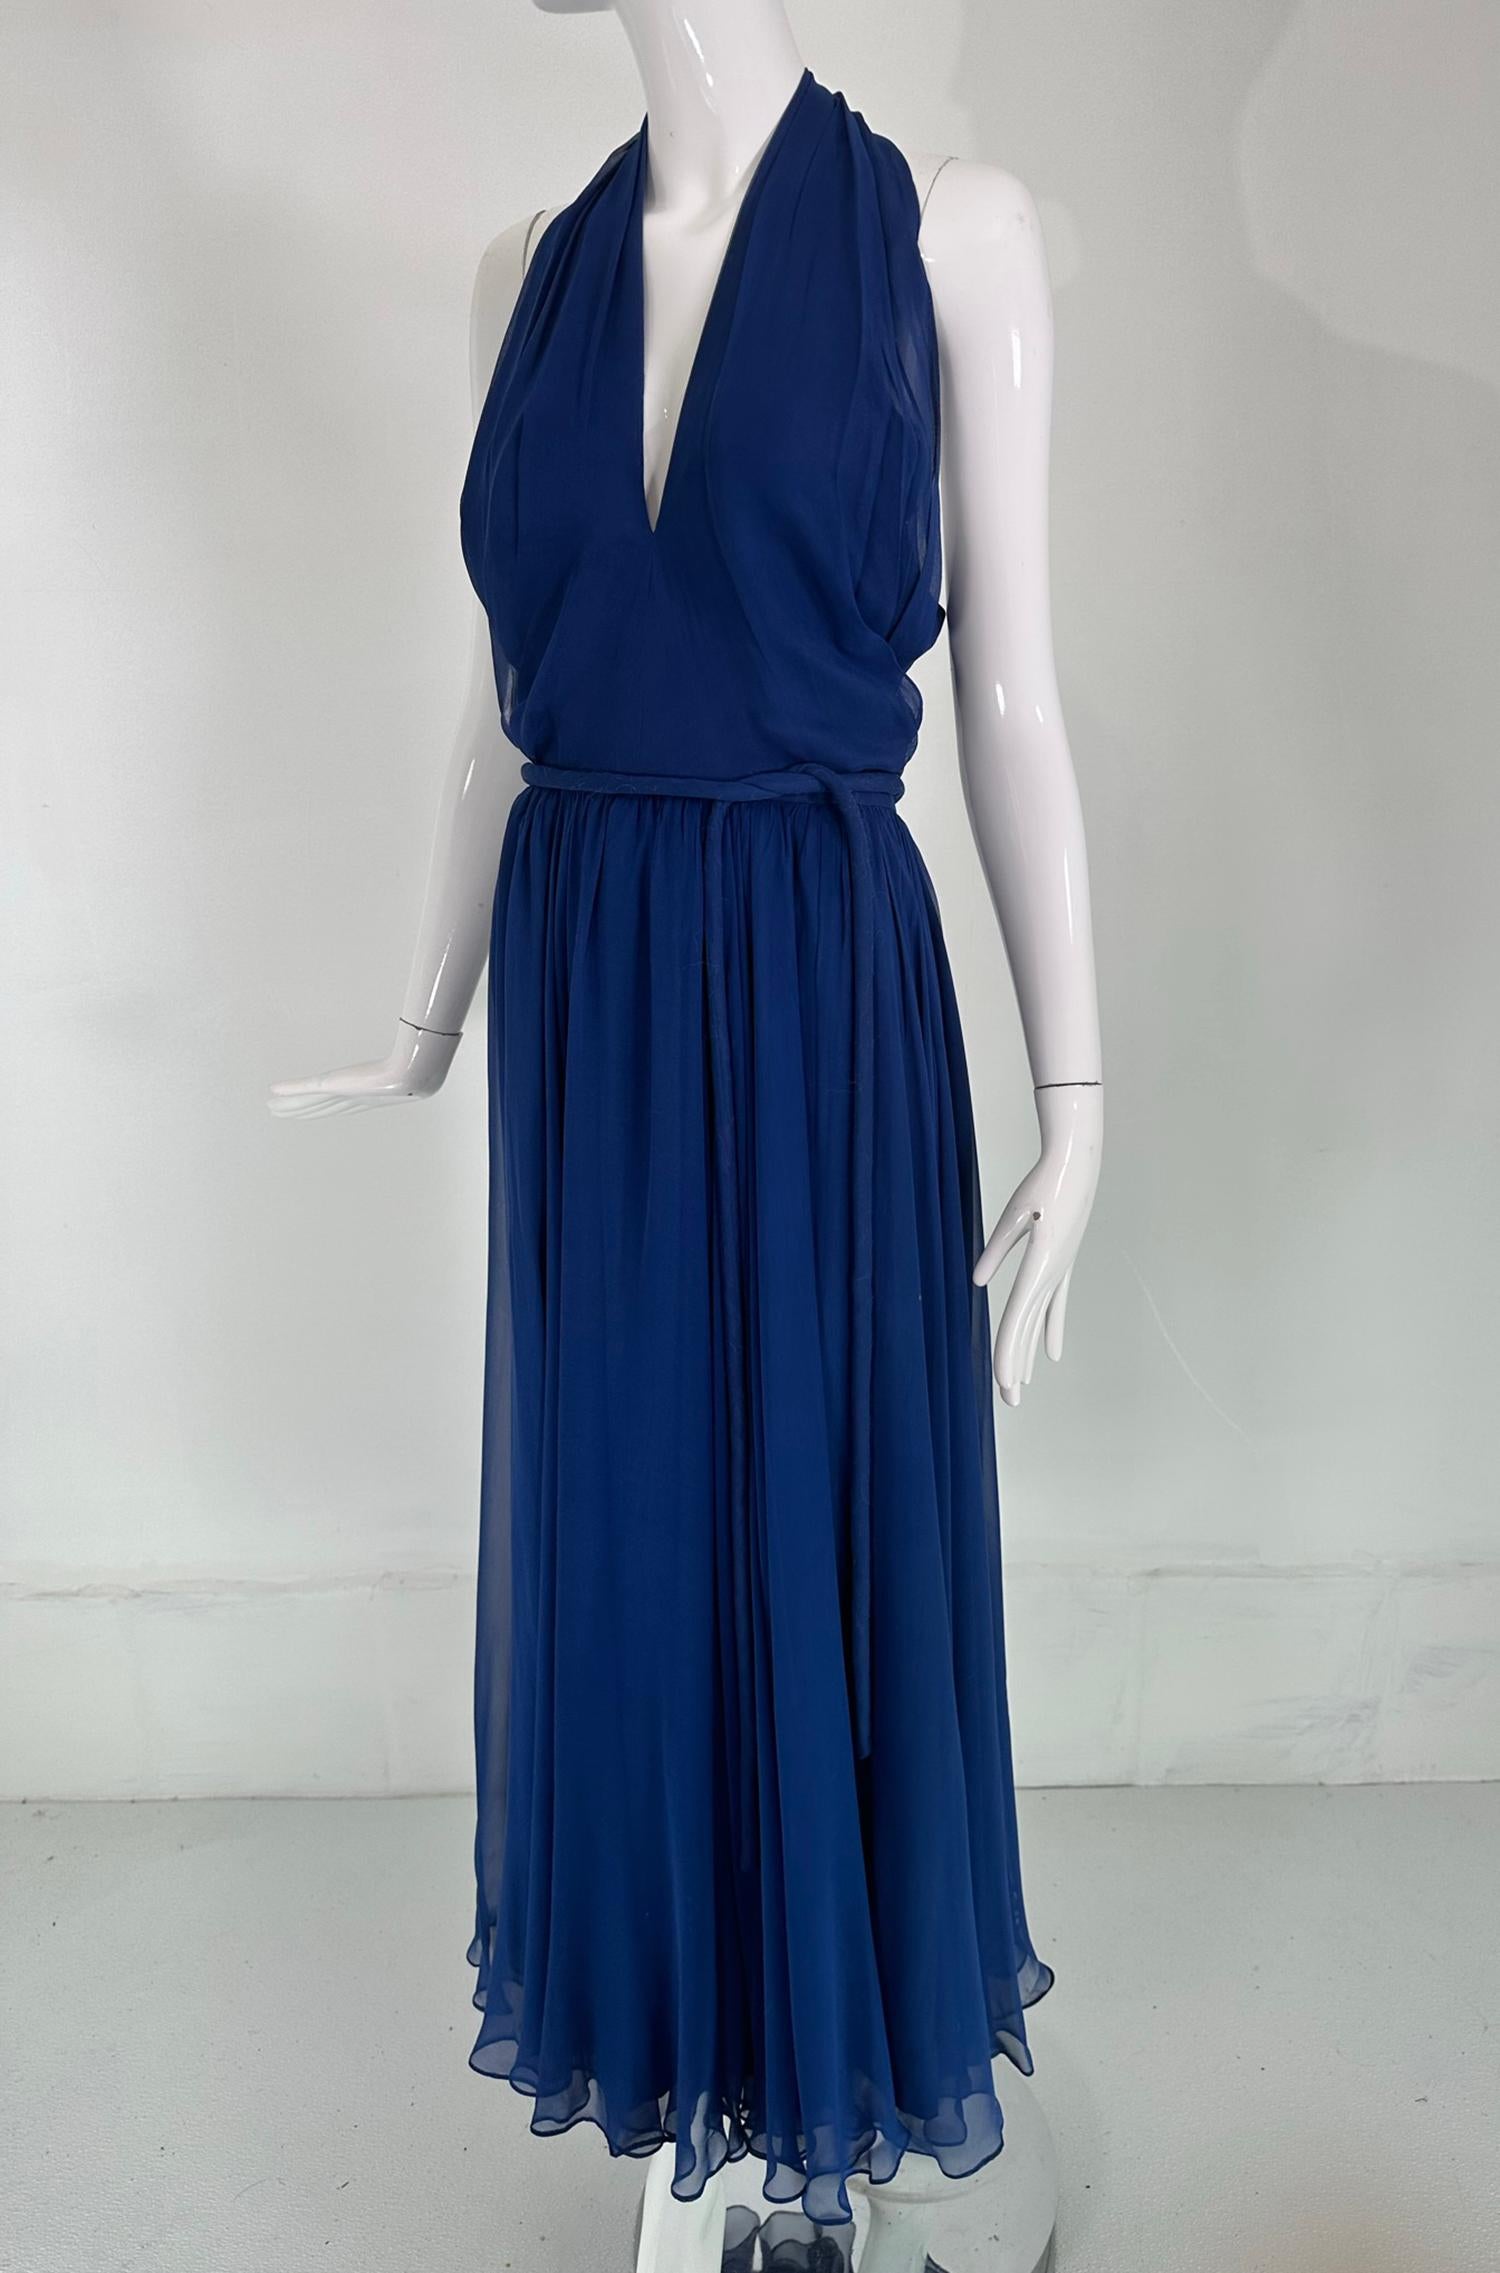 Larry Aldrich, Bonwit Teller, royal blue silk chiffon plunge V halter neck maxi dress from the 1970s. Classic 1940s  Hollywood goddess style gown in a beautiful shade of royal blue. The dress is lined, the chiffon is sheer. The halter top is fitted